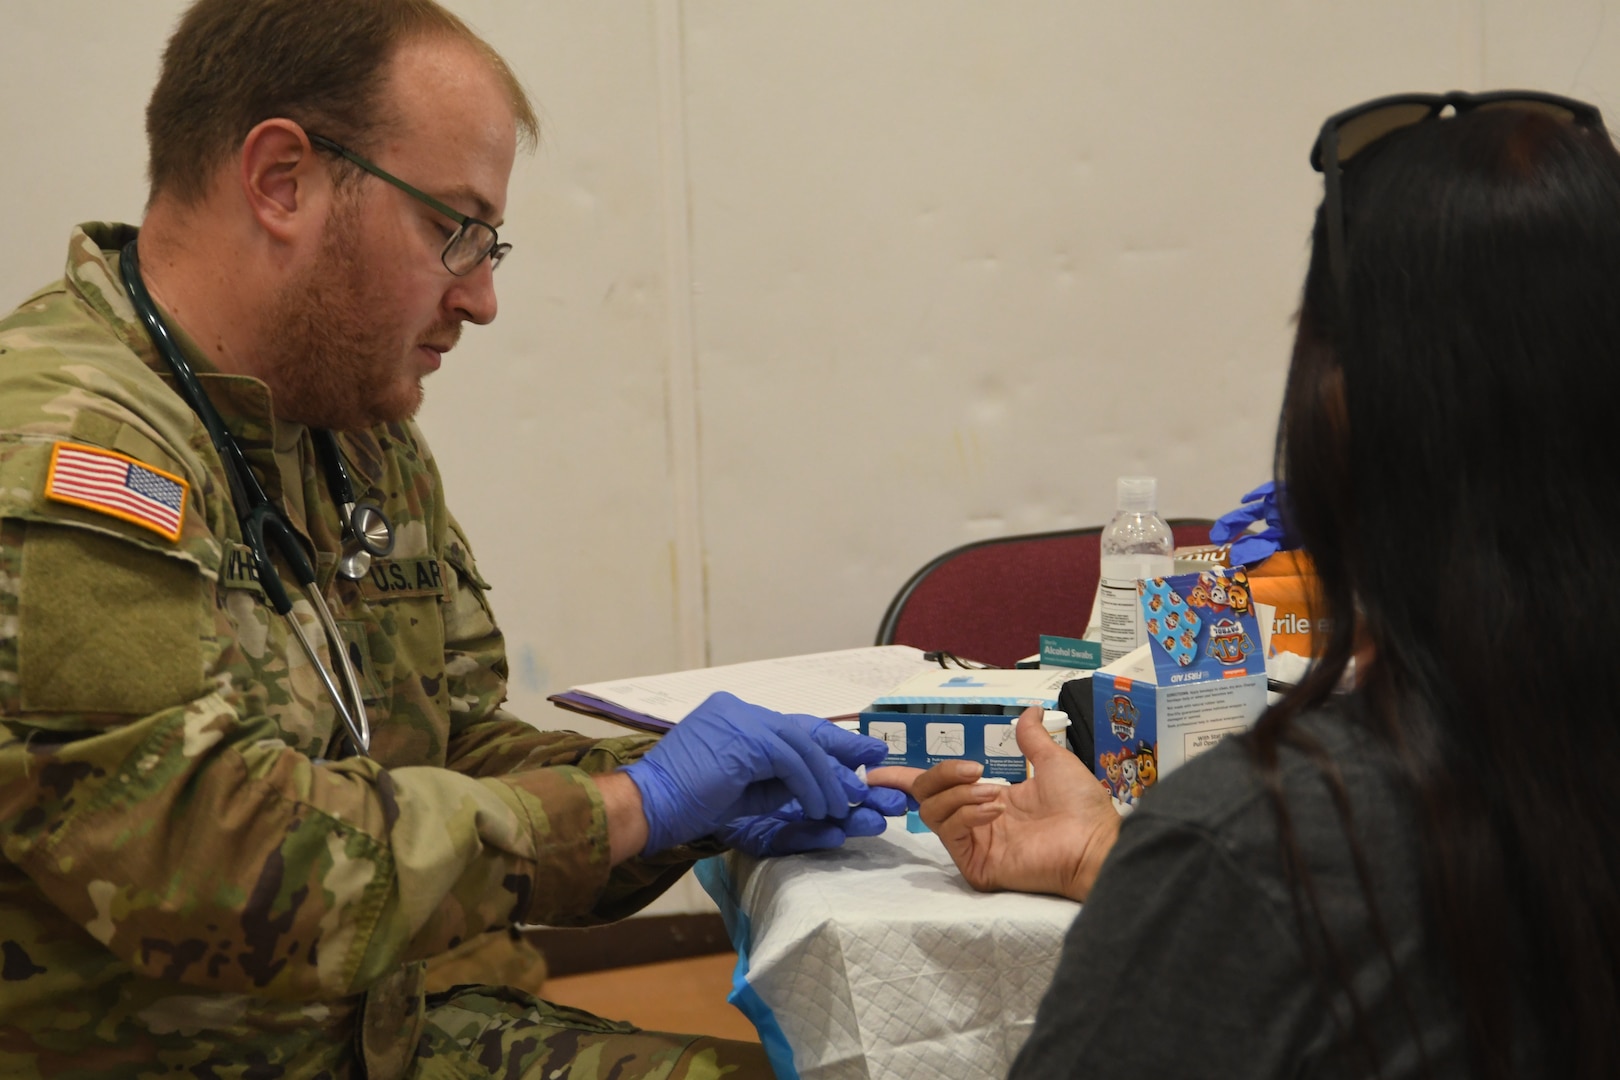 Over 100 service members from the Montana, Arizona and New Mexico National Guard, U.S. Army Reserves, U.S. Public Health Service and U.S. Air Force conducted medical operations for two weeks in August to support of the 2023 Walking Shield Innovative Readiness Training at the Fort Belknap Reservation, Montana.